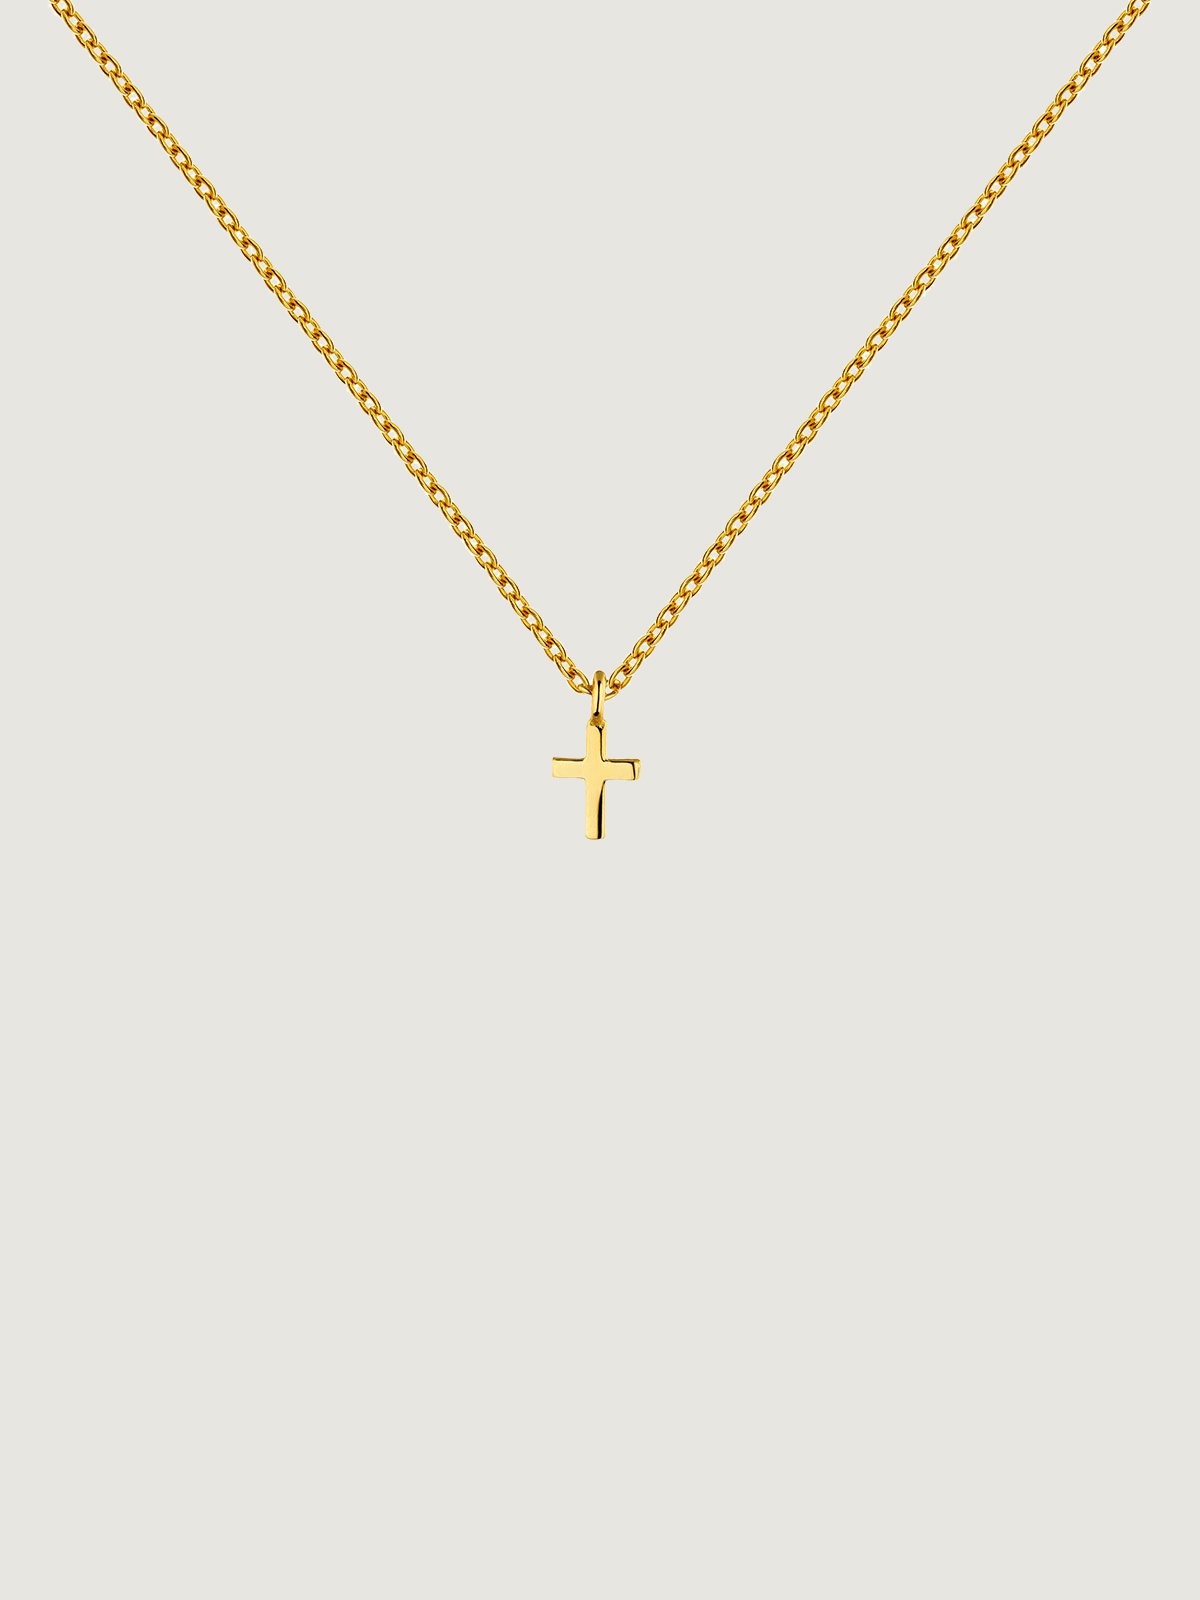 925 silver pendant, dipped in 18K yellow gold with a cross.